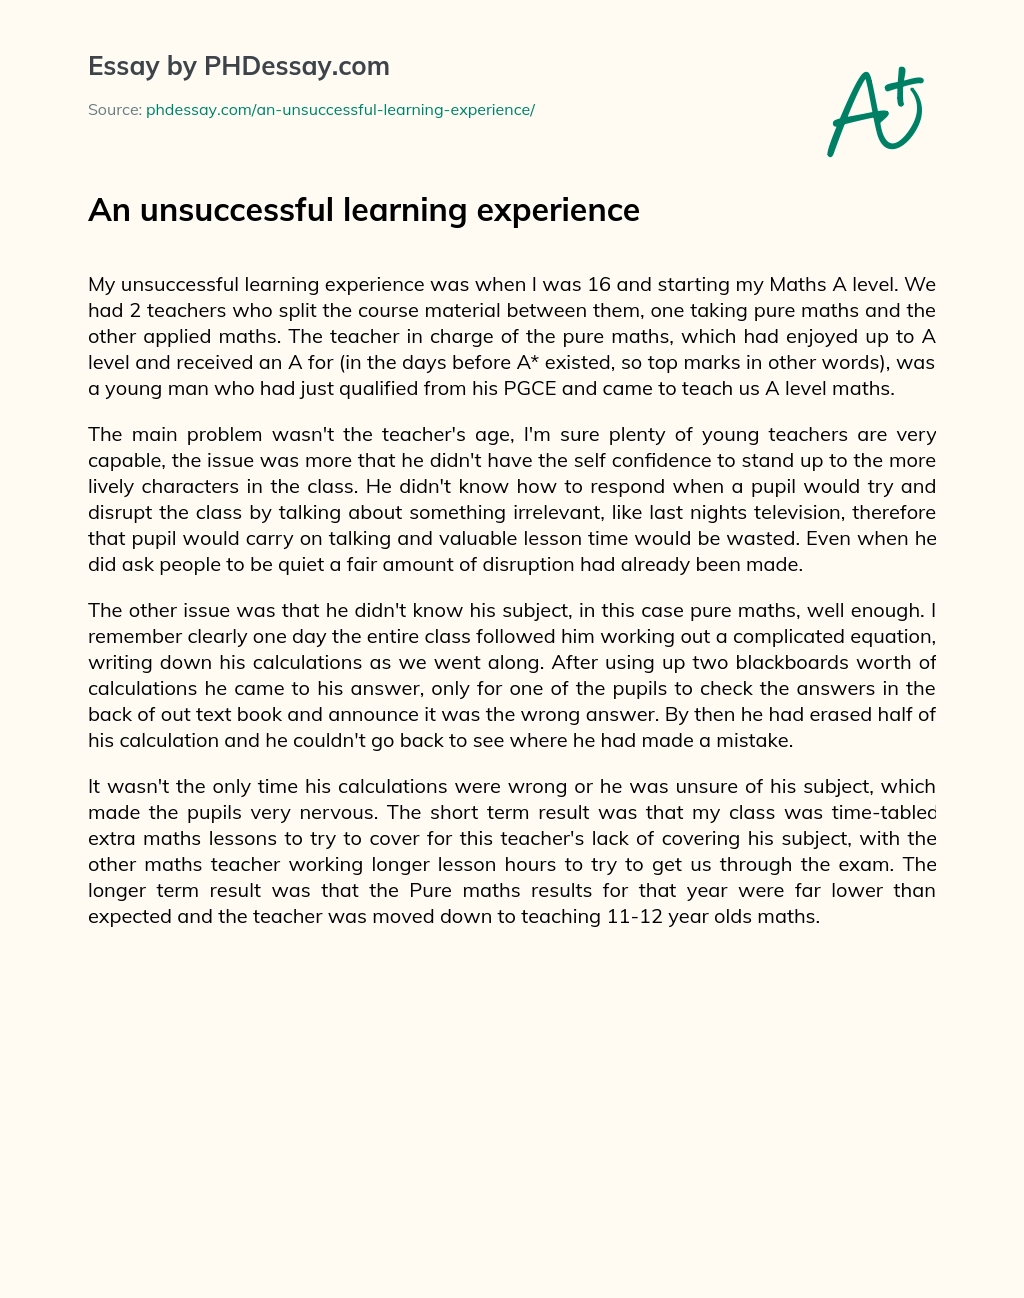 An unsuccessful learning experience essay